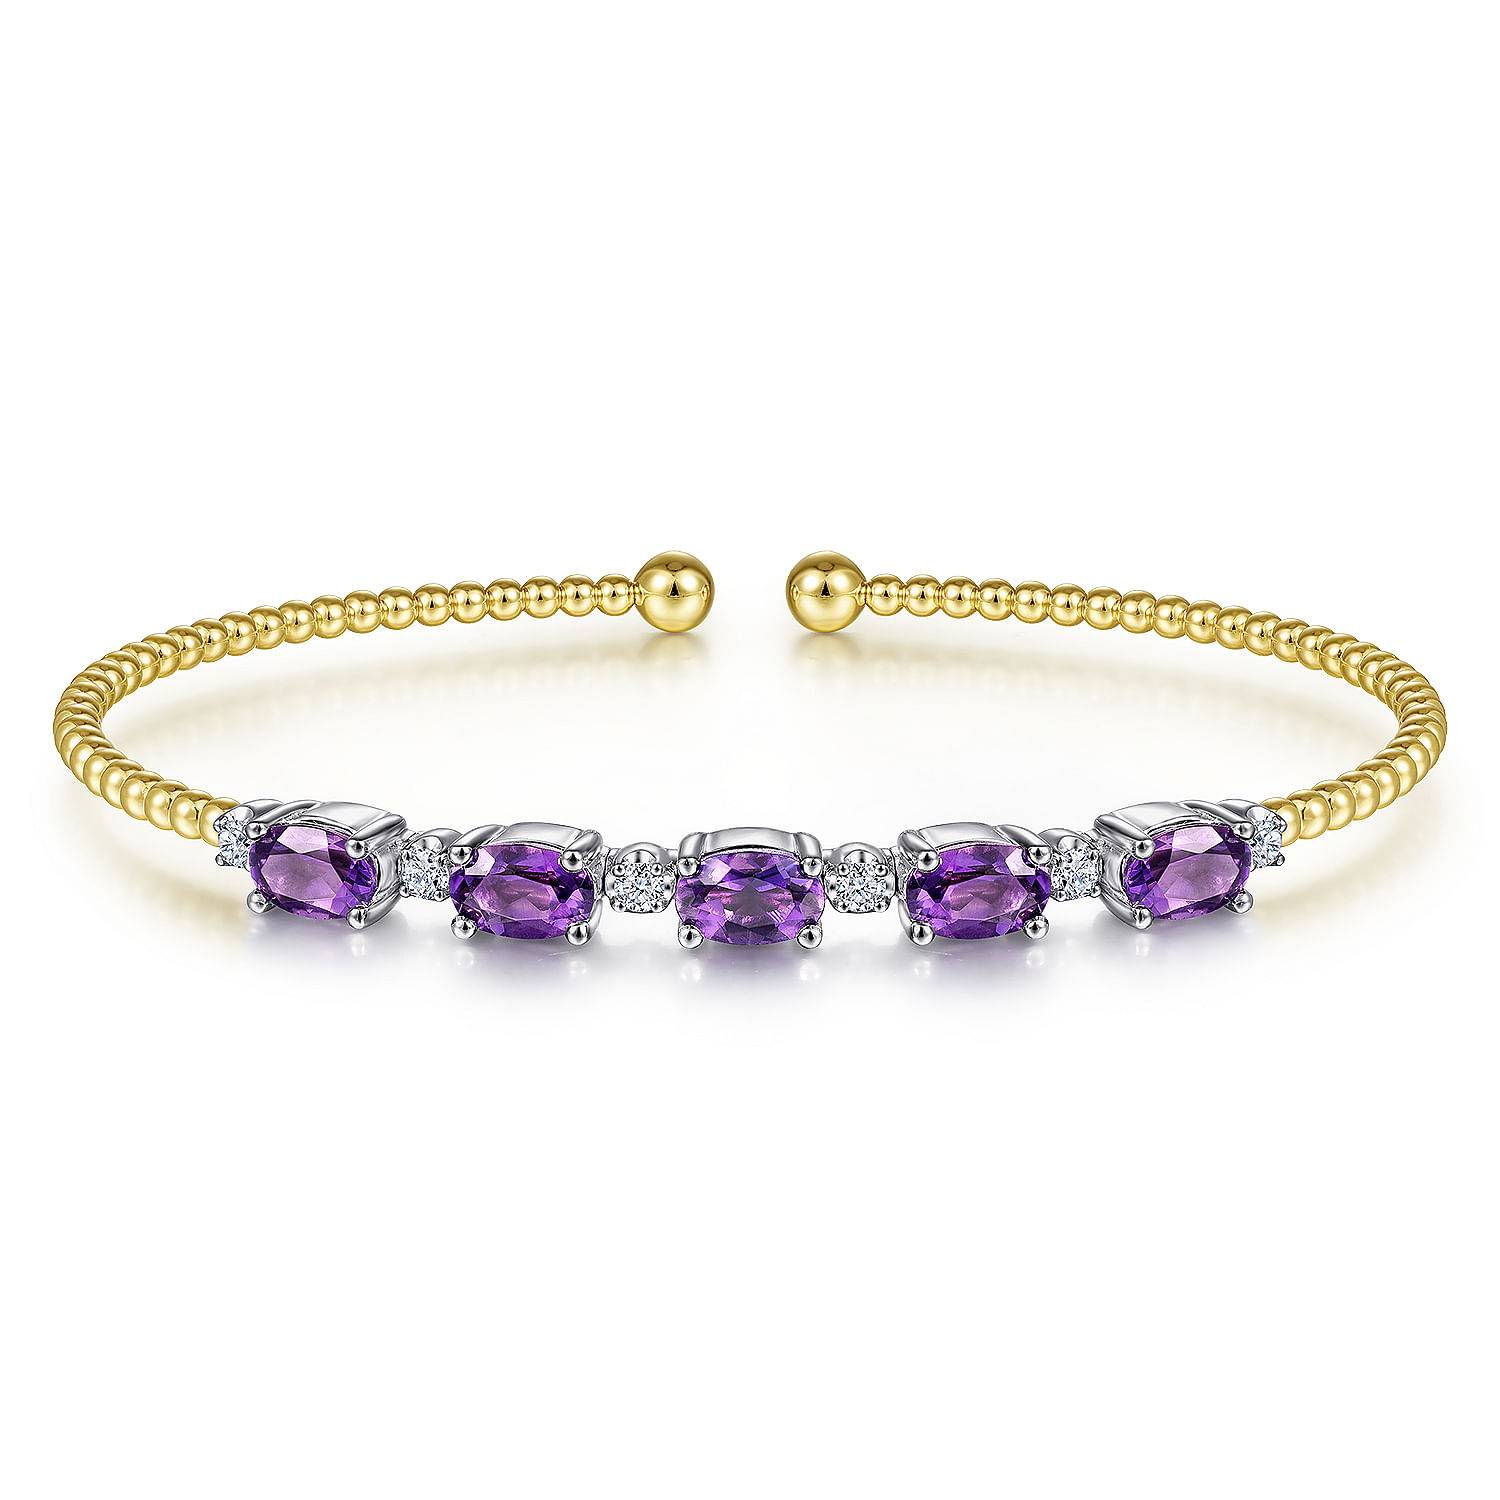 14K White-Yellow Gold Bujukan Bead Cuff Bracelet with Amethyst and Diamond Stations